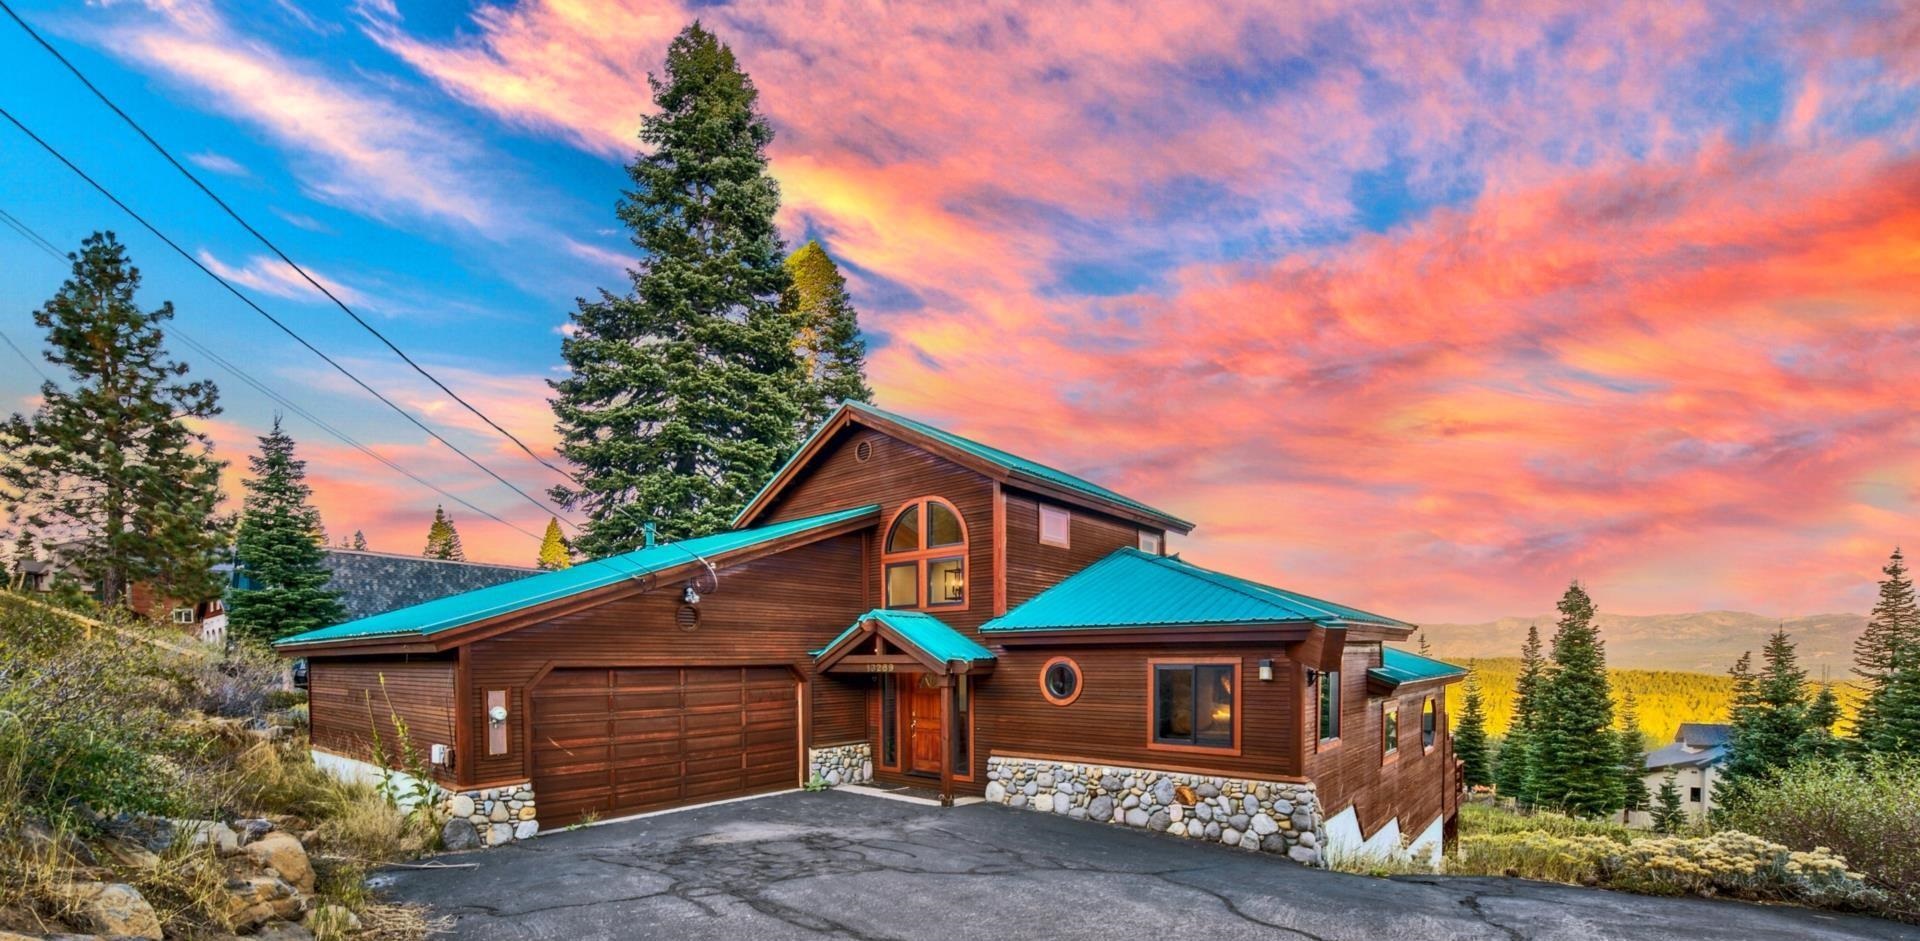 Image for 13289 Skislope Way, Truckee, CA 96161